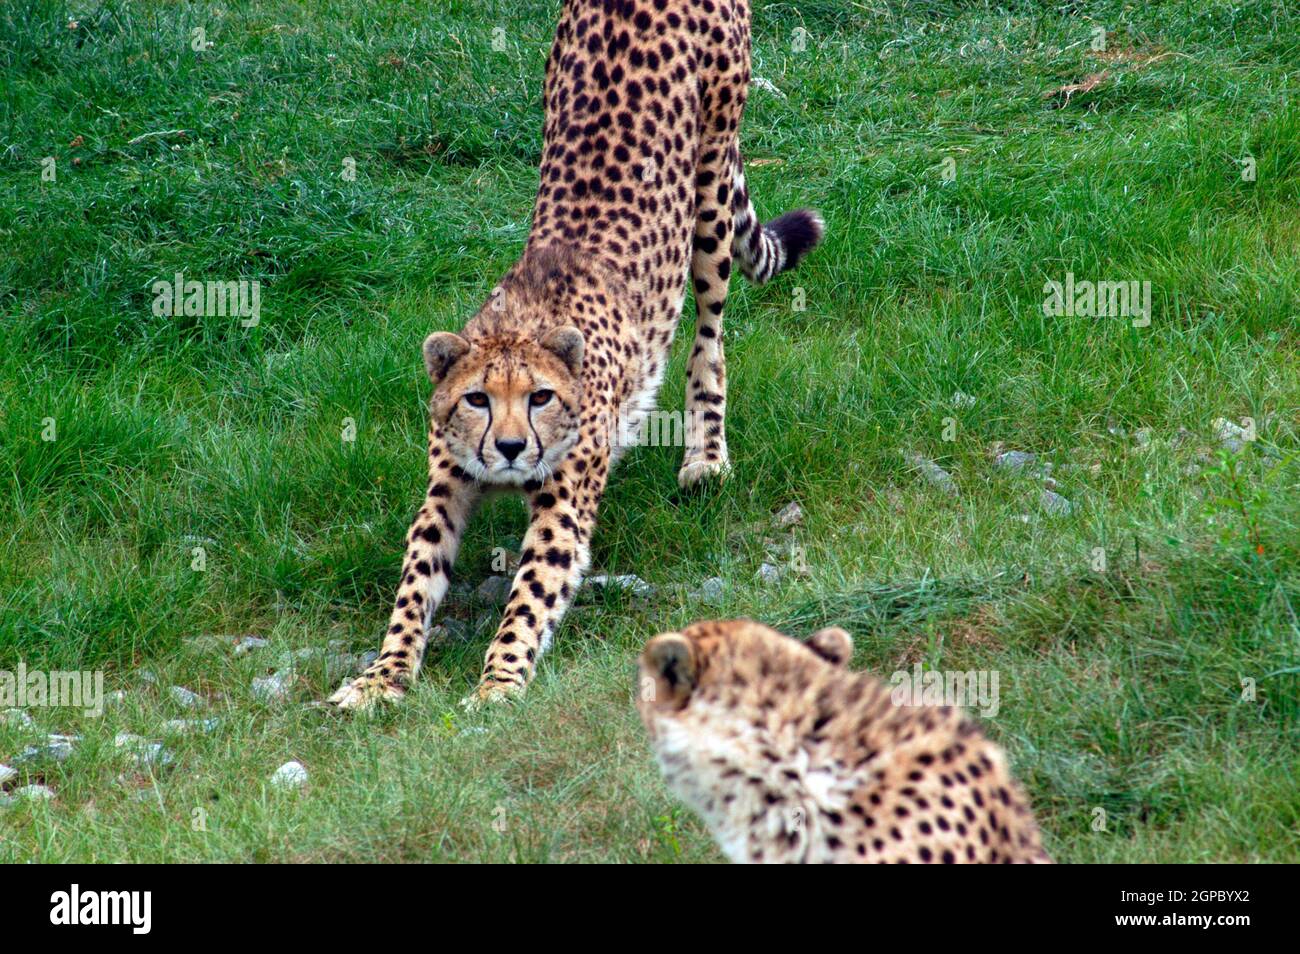 cheetahs at an animal park, in an outdoor enclosure with green meadow Stock Photo